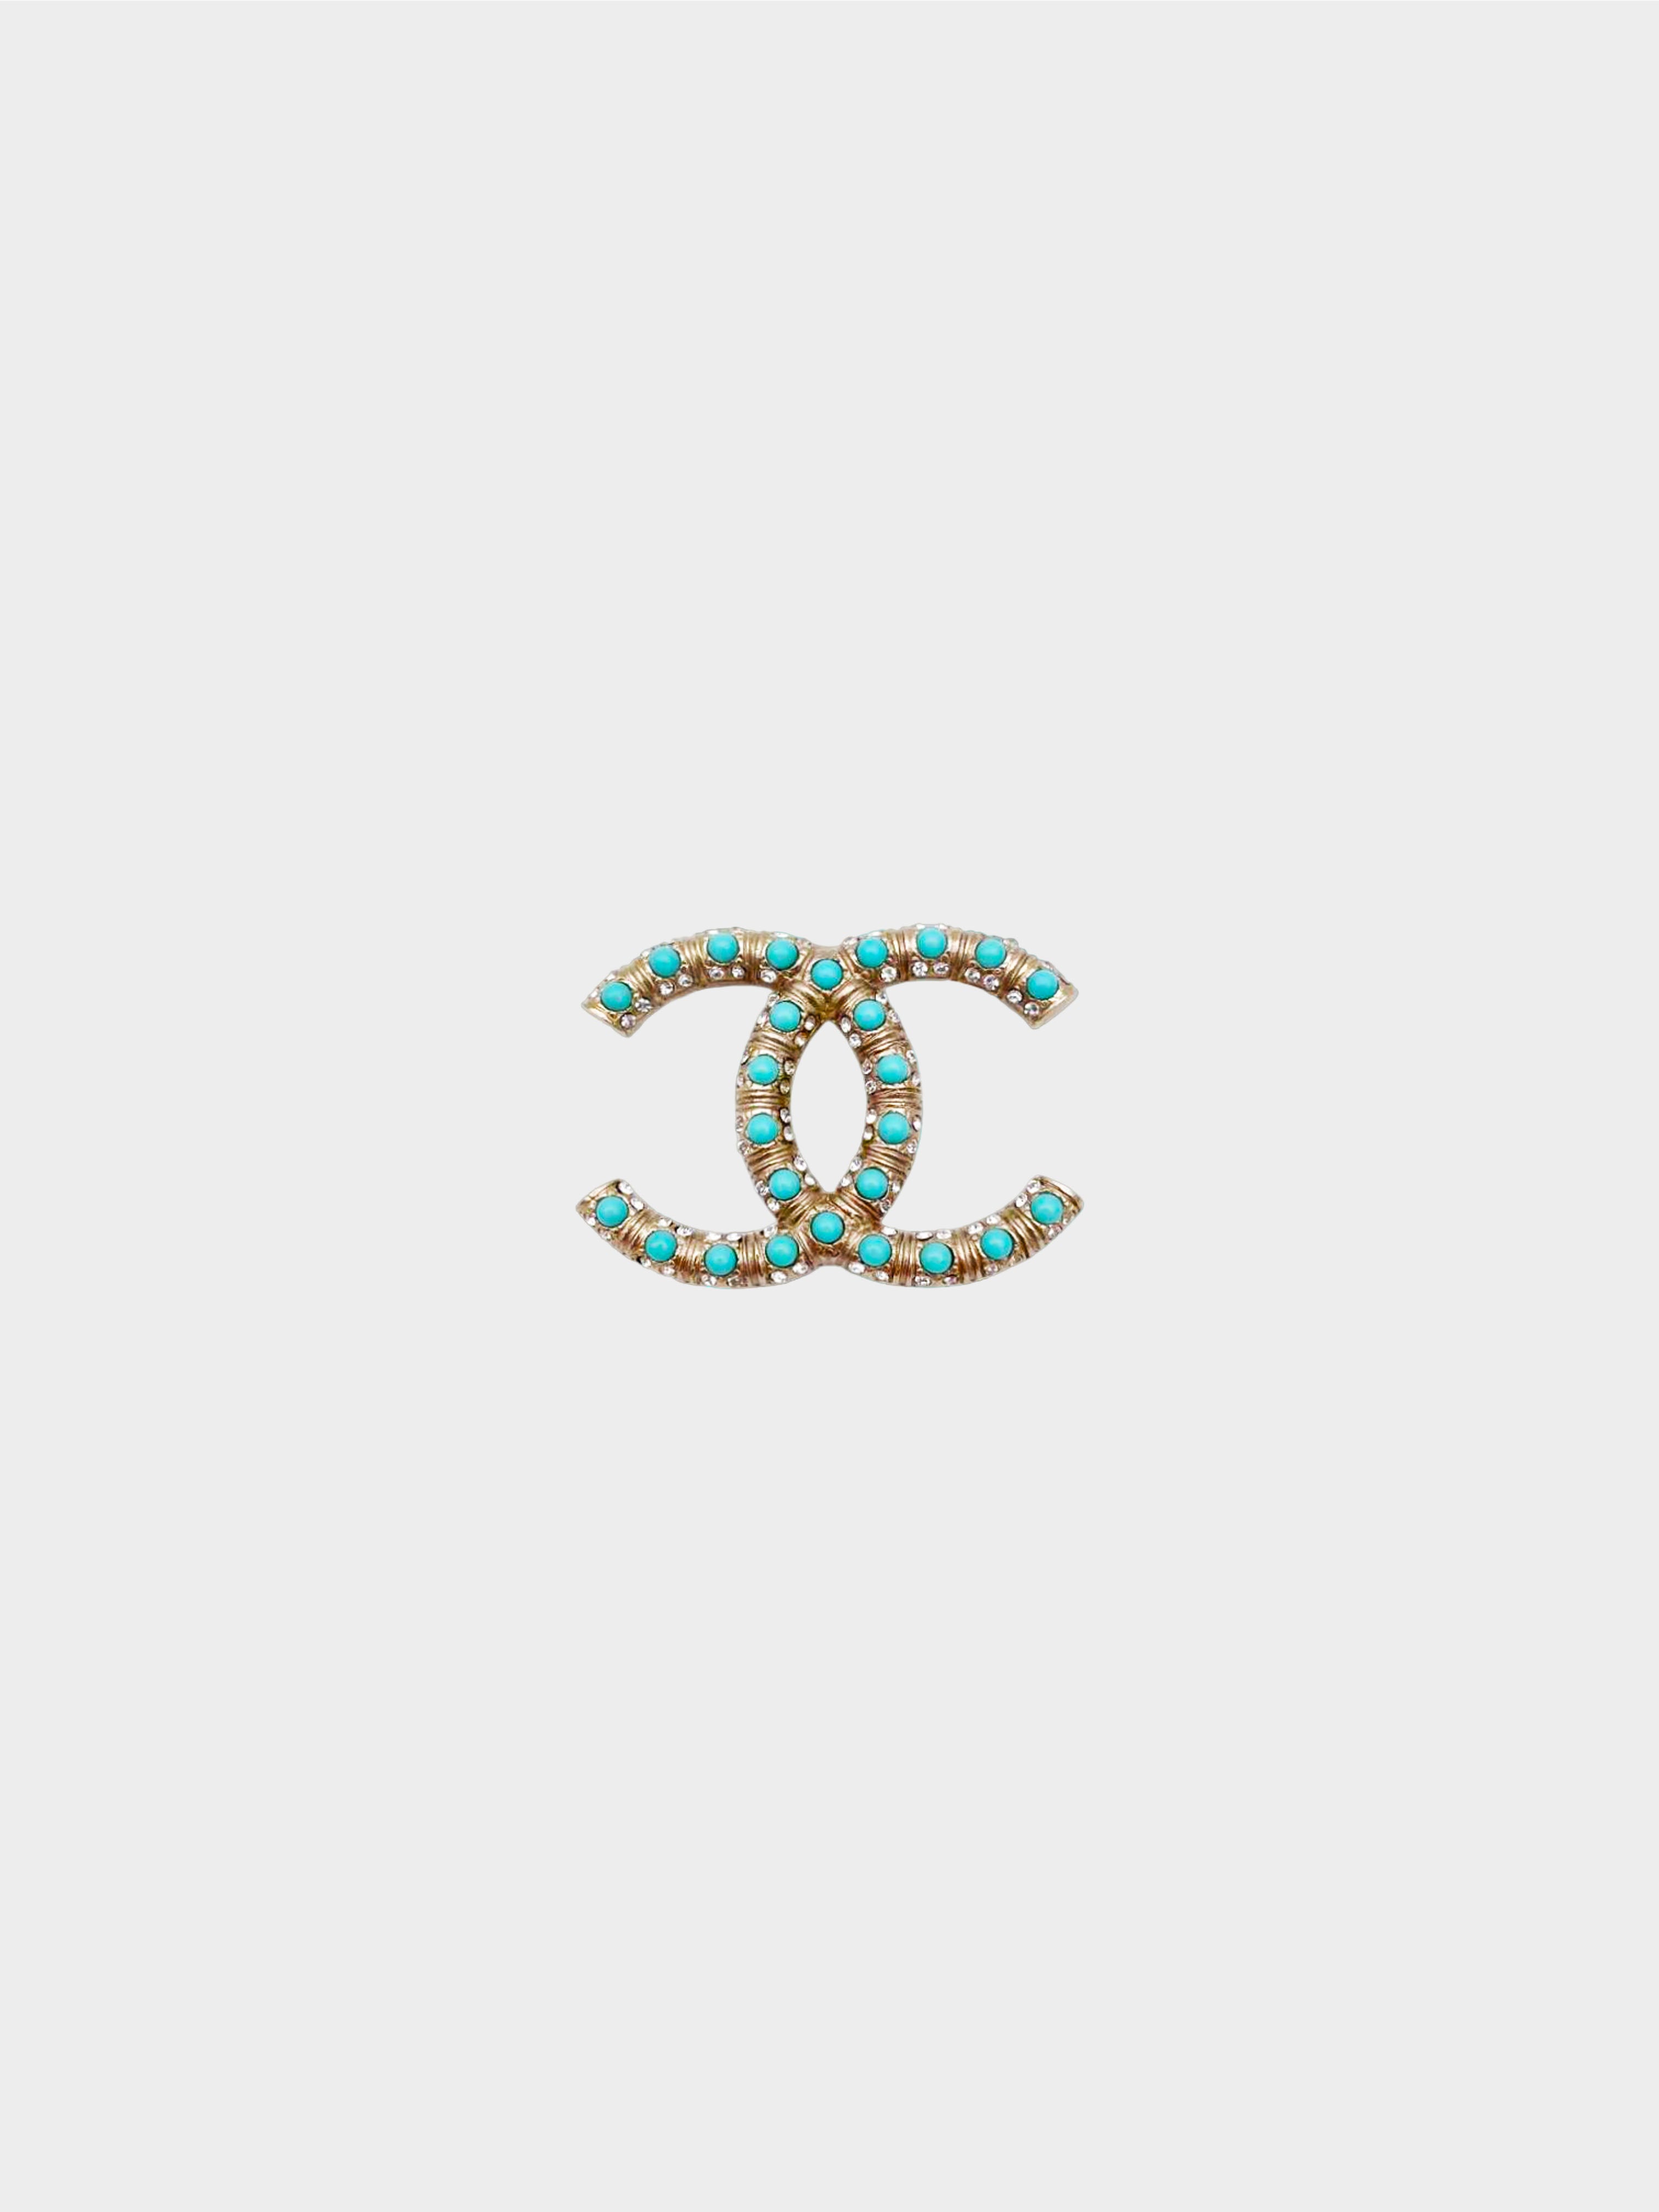 Chanel 2008 Champagne Gold CC Turquoise Studded Rhinestone Brooch · INTO